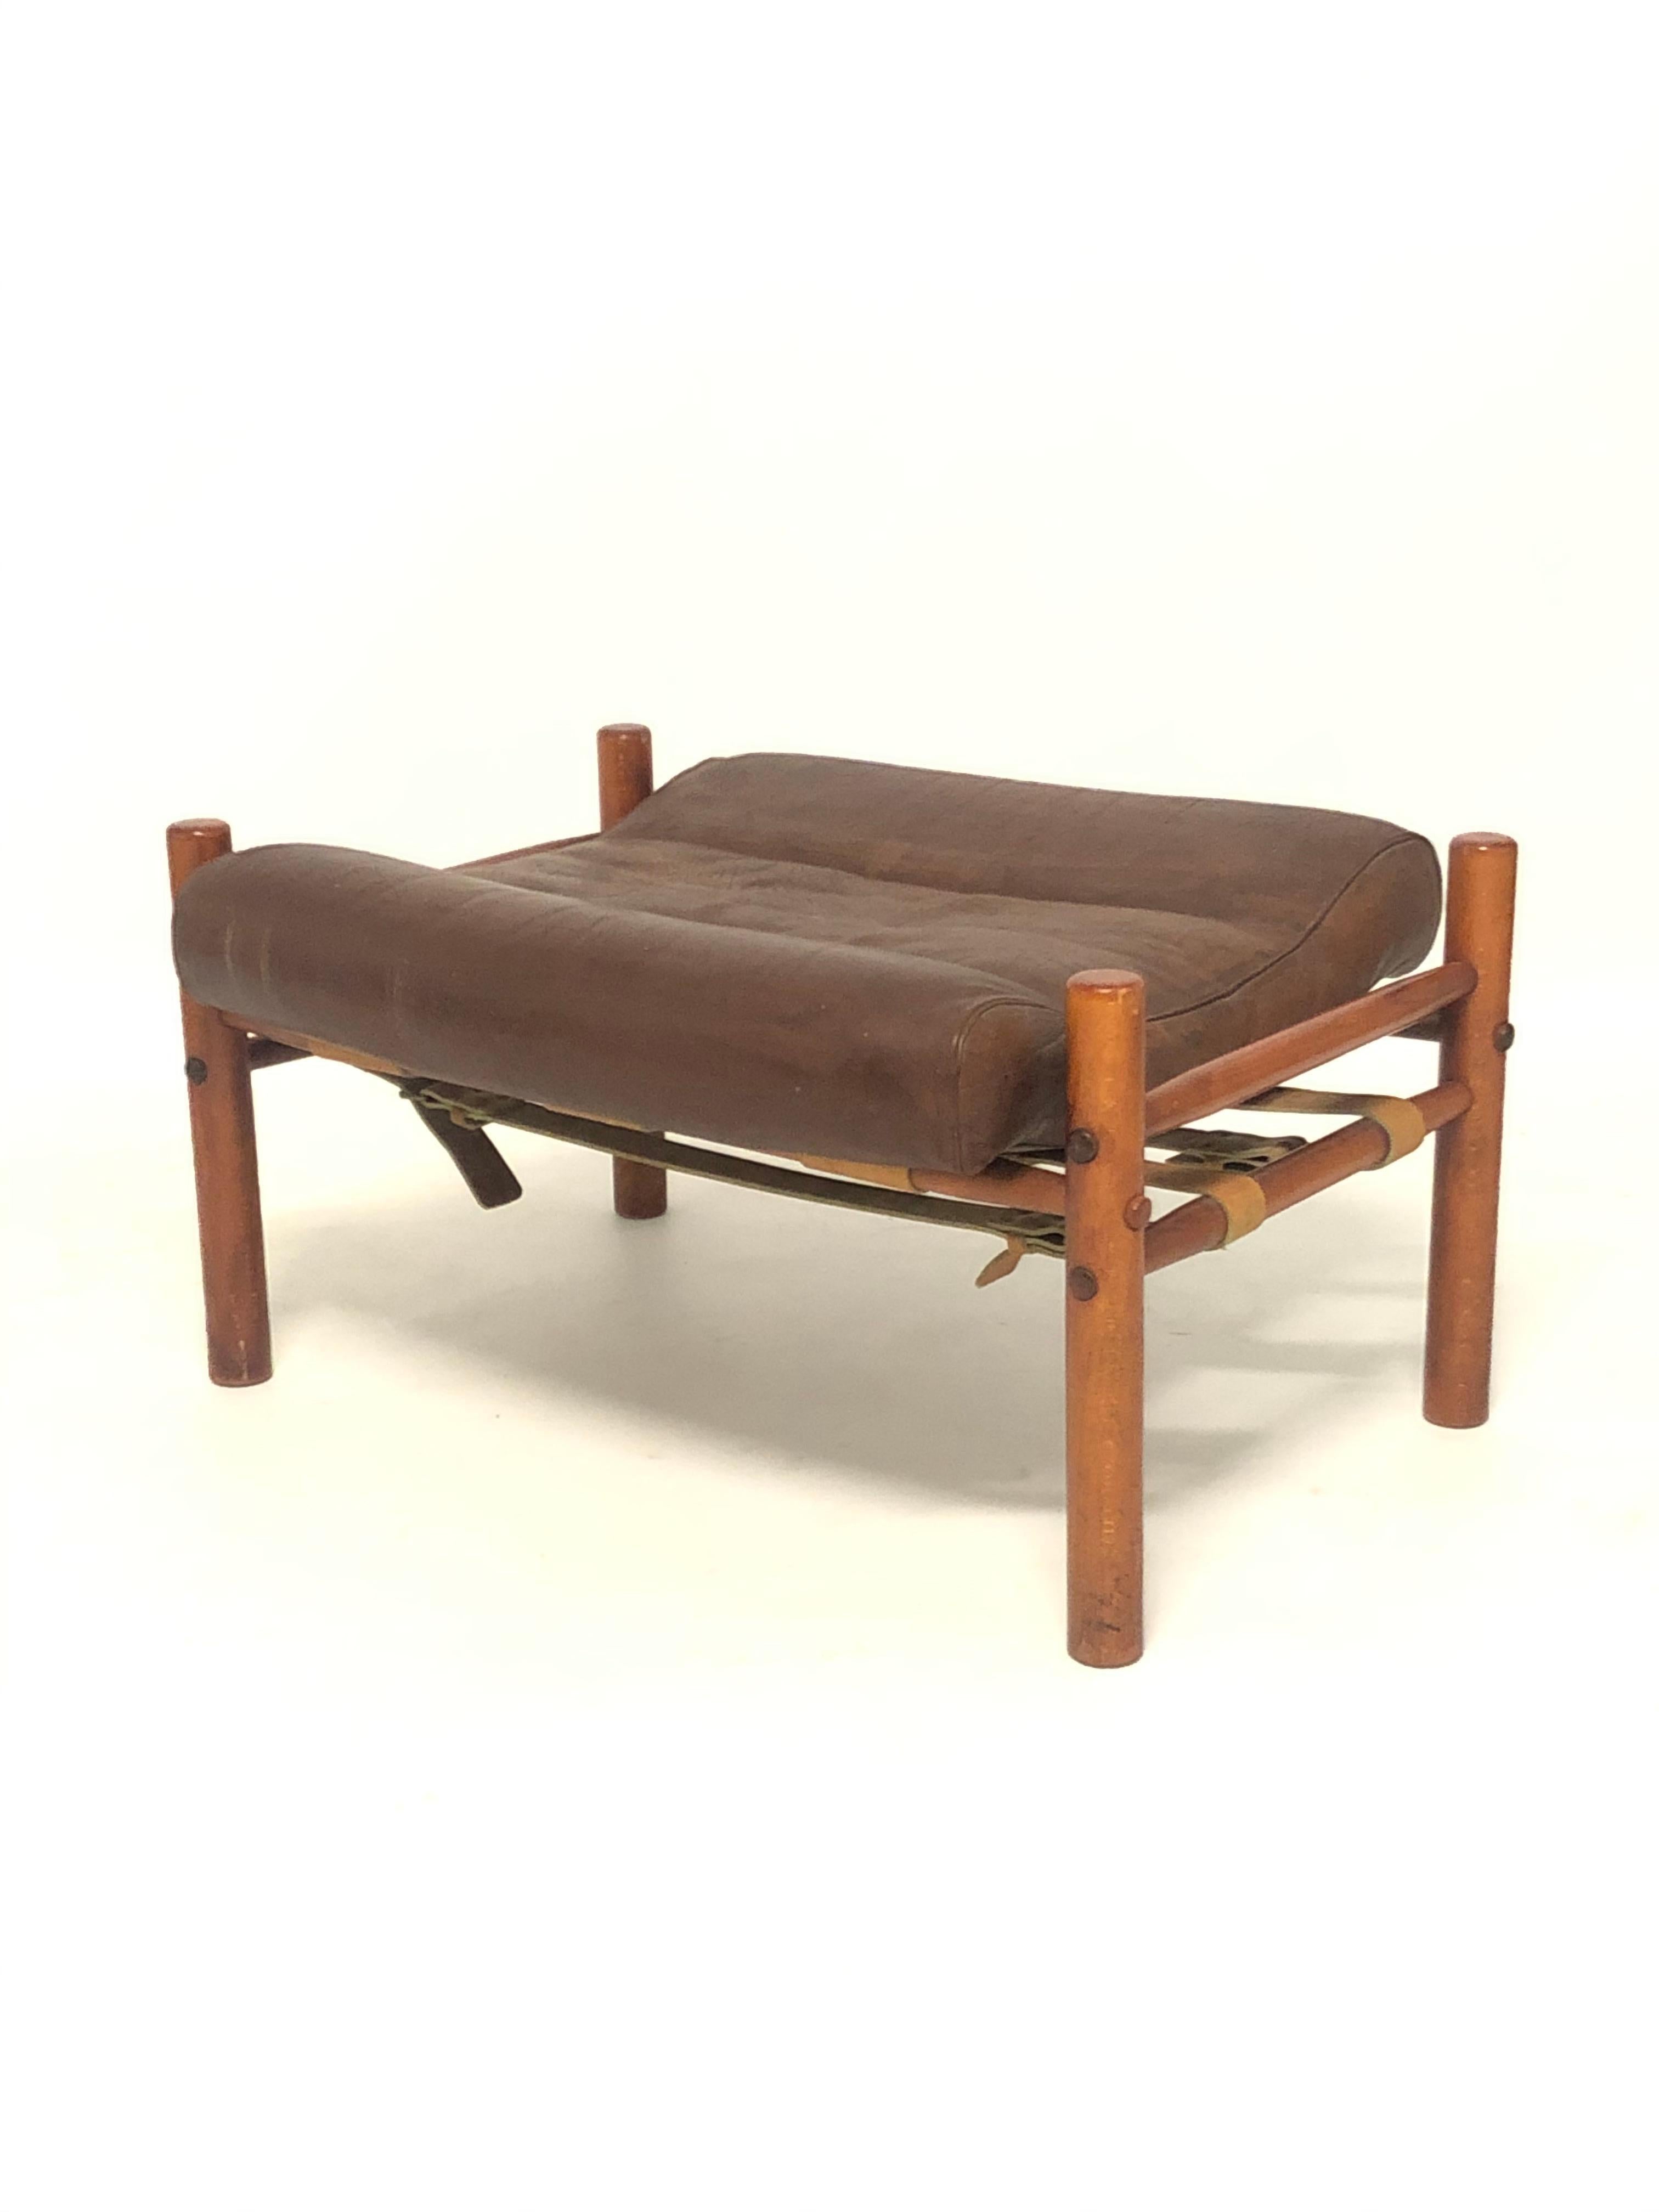 An original 1970s production footstool ottoman. In stained beech and teak wood with chocolate brown leather seat. These stools work with both Inca and Kontiki model chairs or as a stand alone stool.

In good original condition. The frame is solid